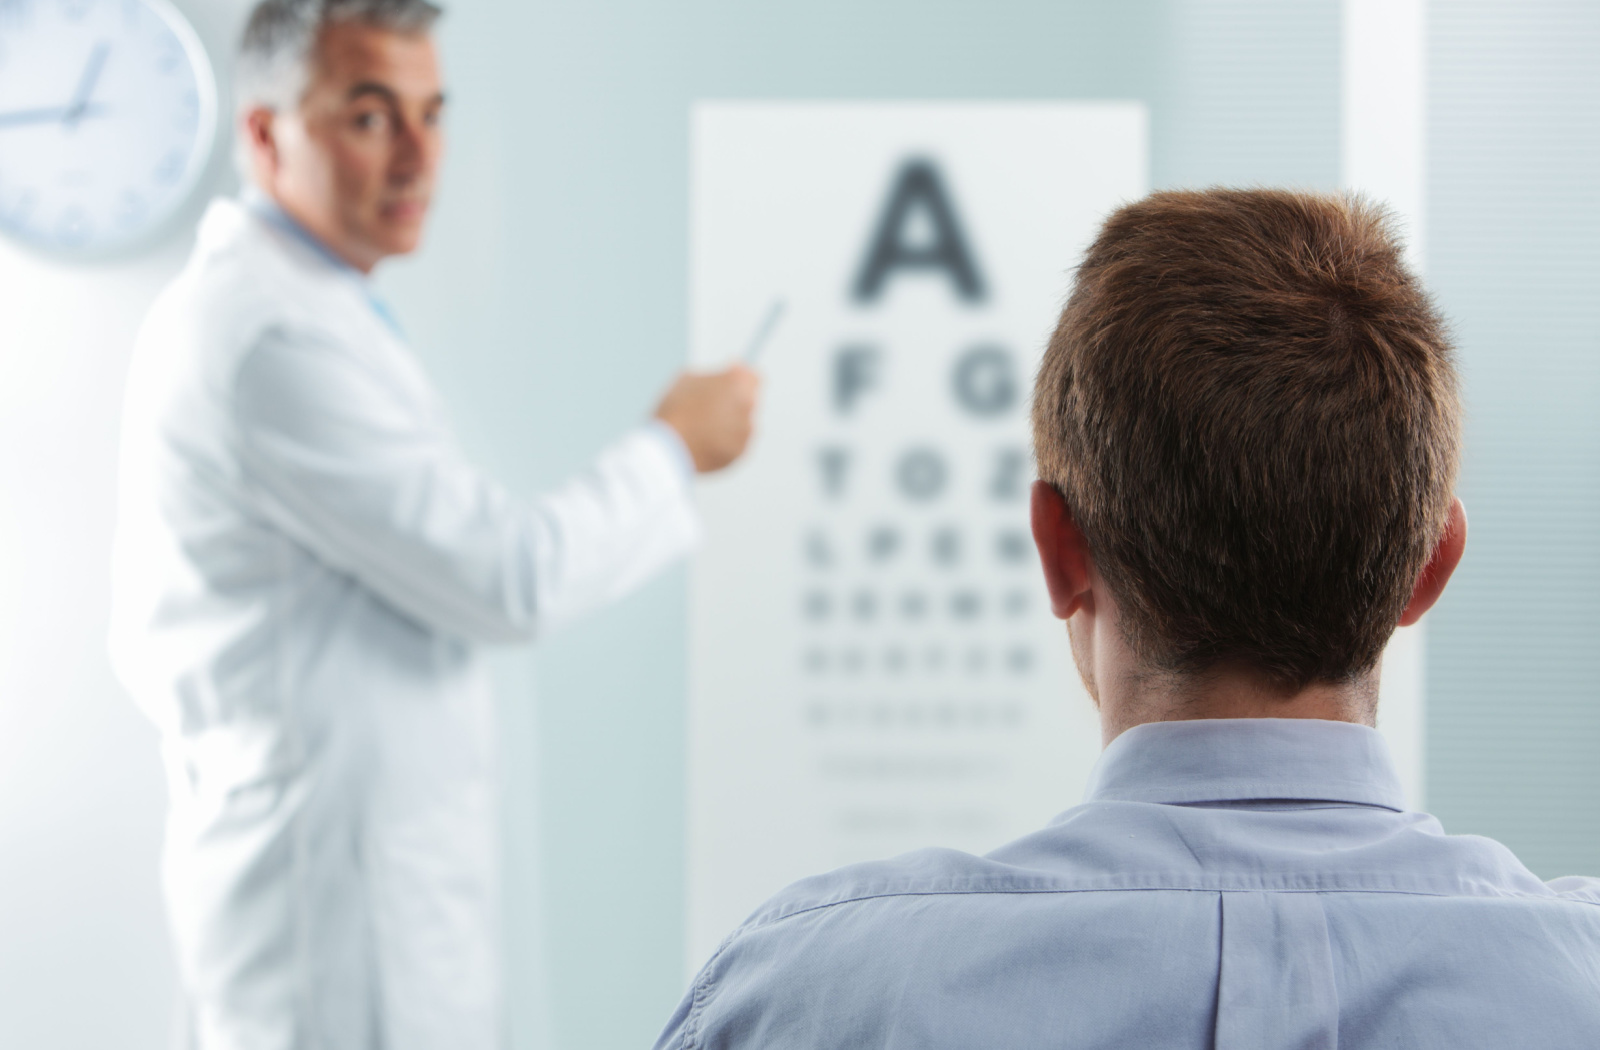 A man sits in front of a Snellen eye chart, and an optometrist is asking him to read the letters on the chart